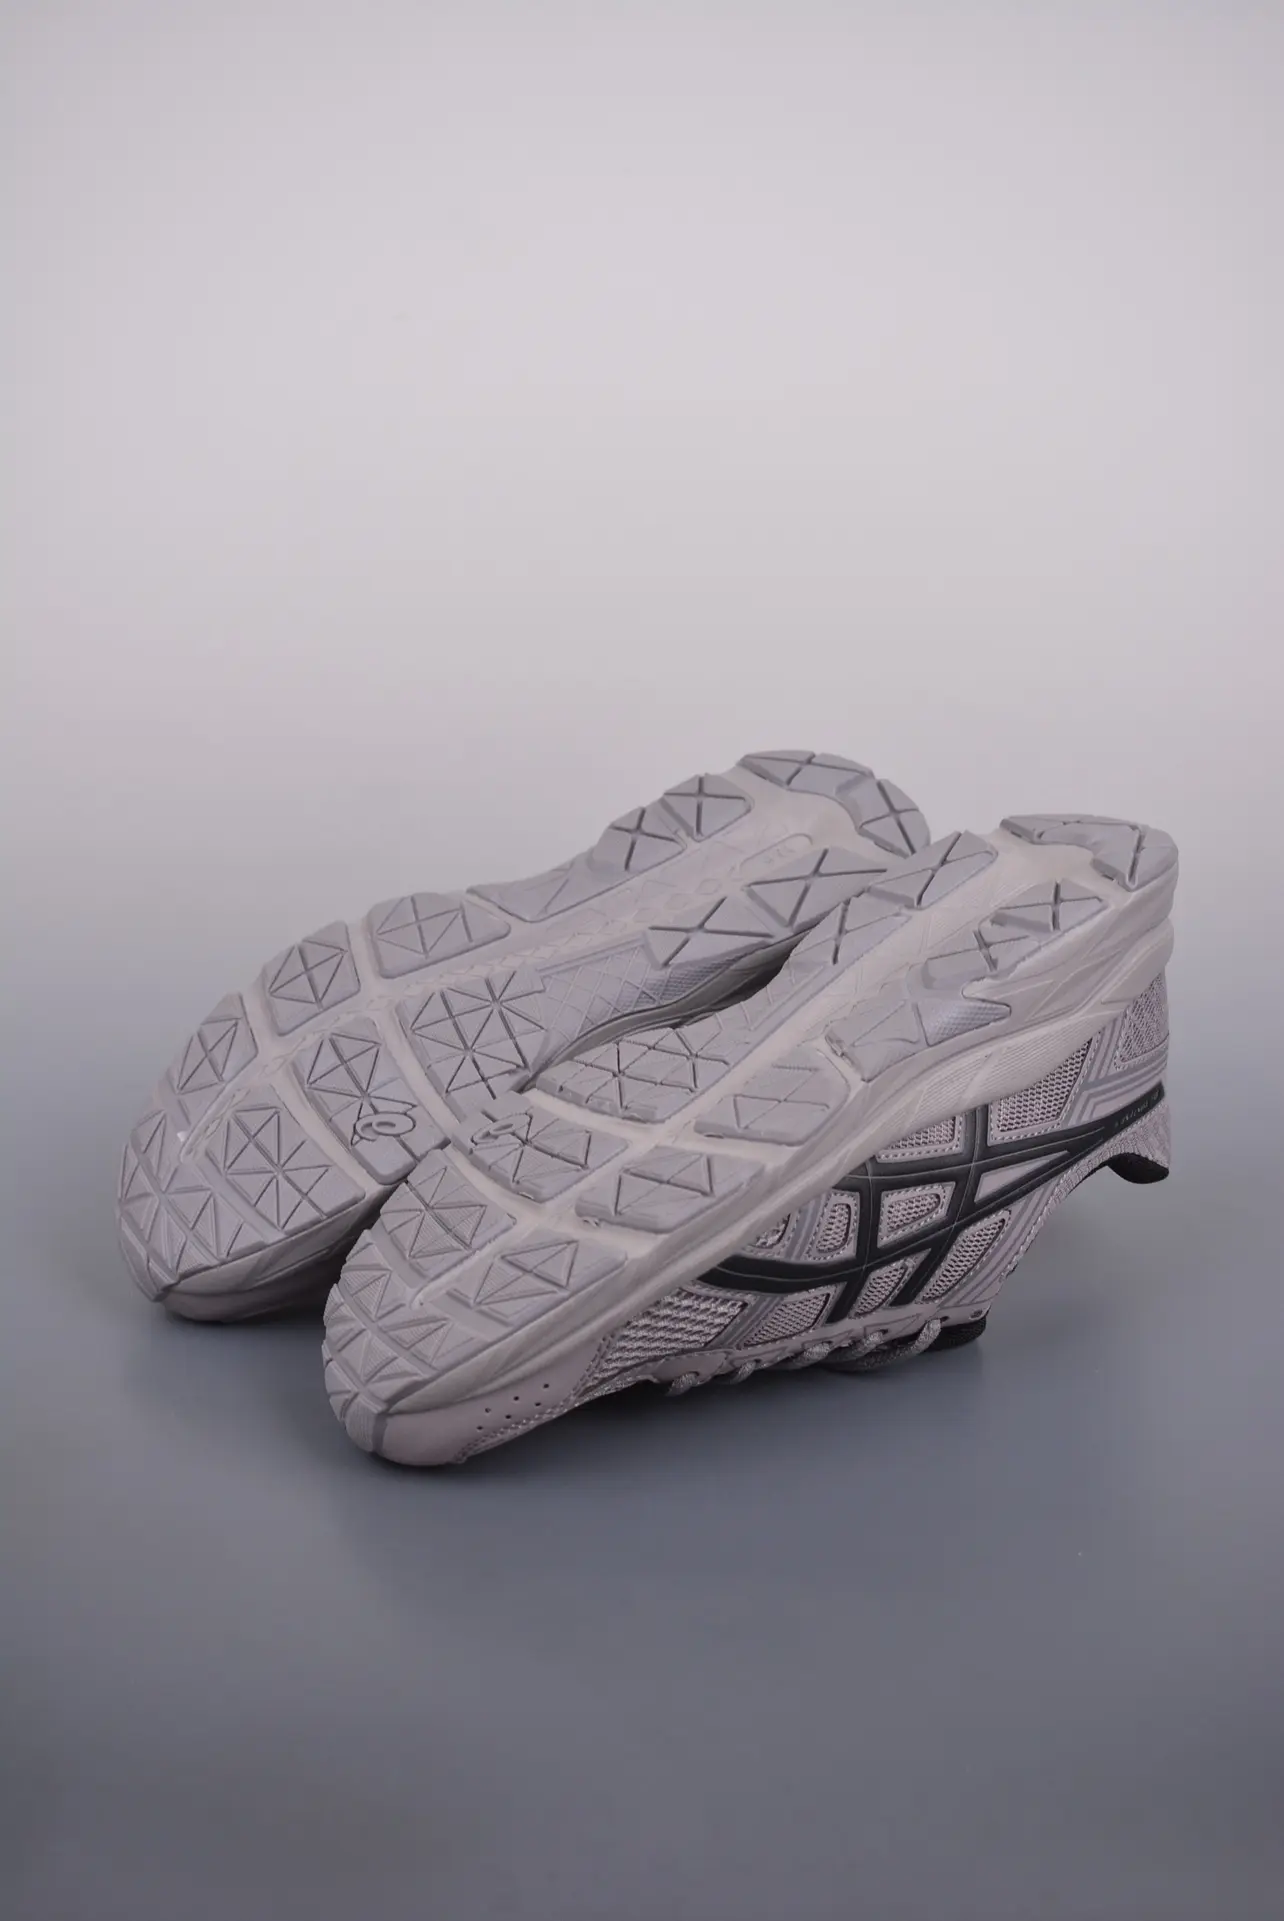 YASSW | ASICS Jolt 3 Running Shoes Review - Style, Comfort, Fit, and Performance